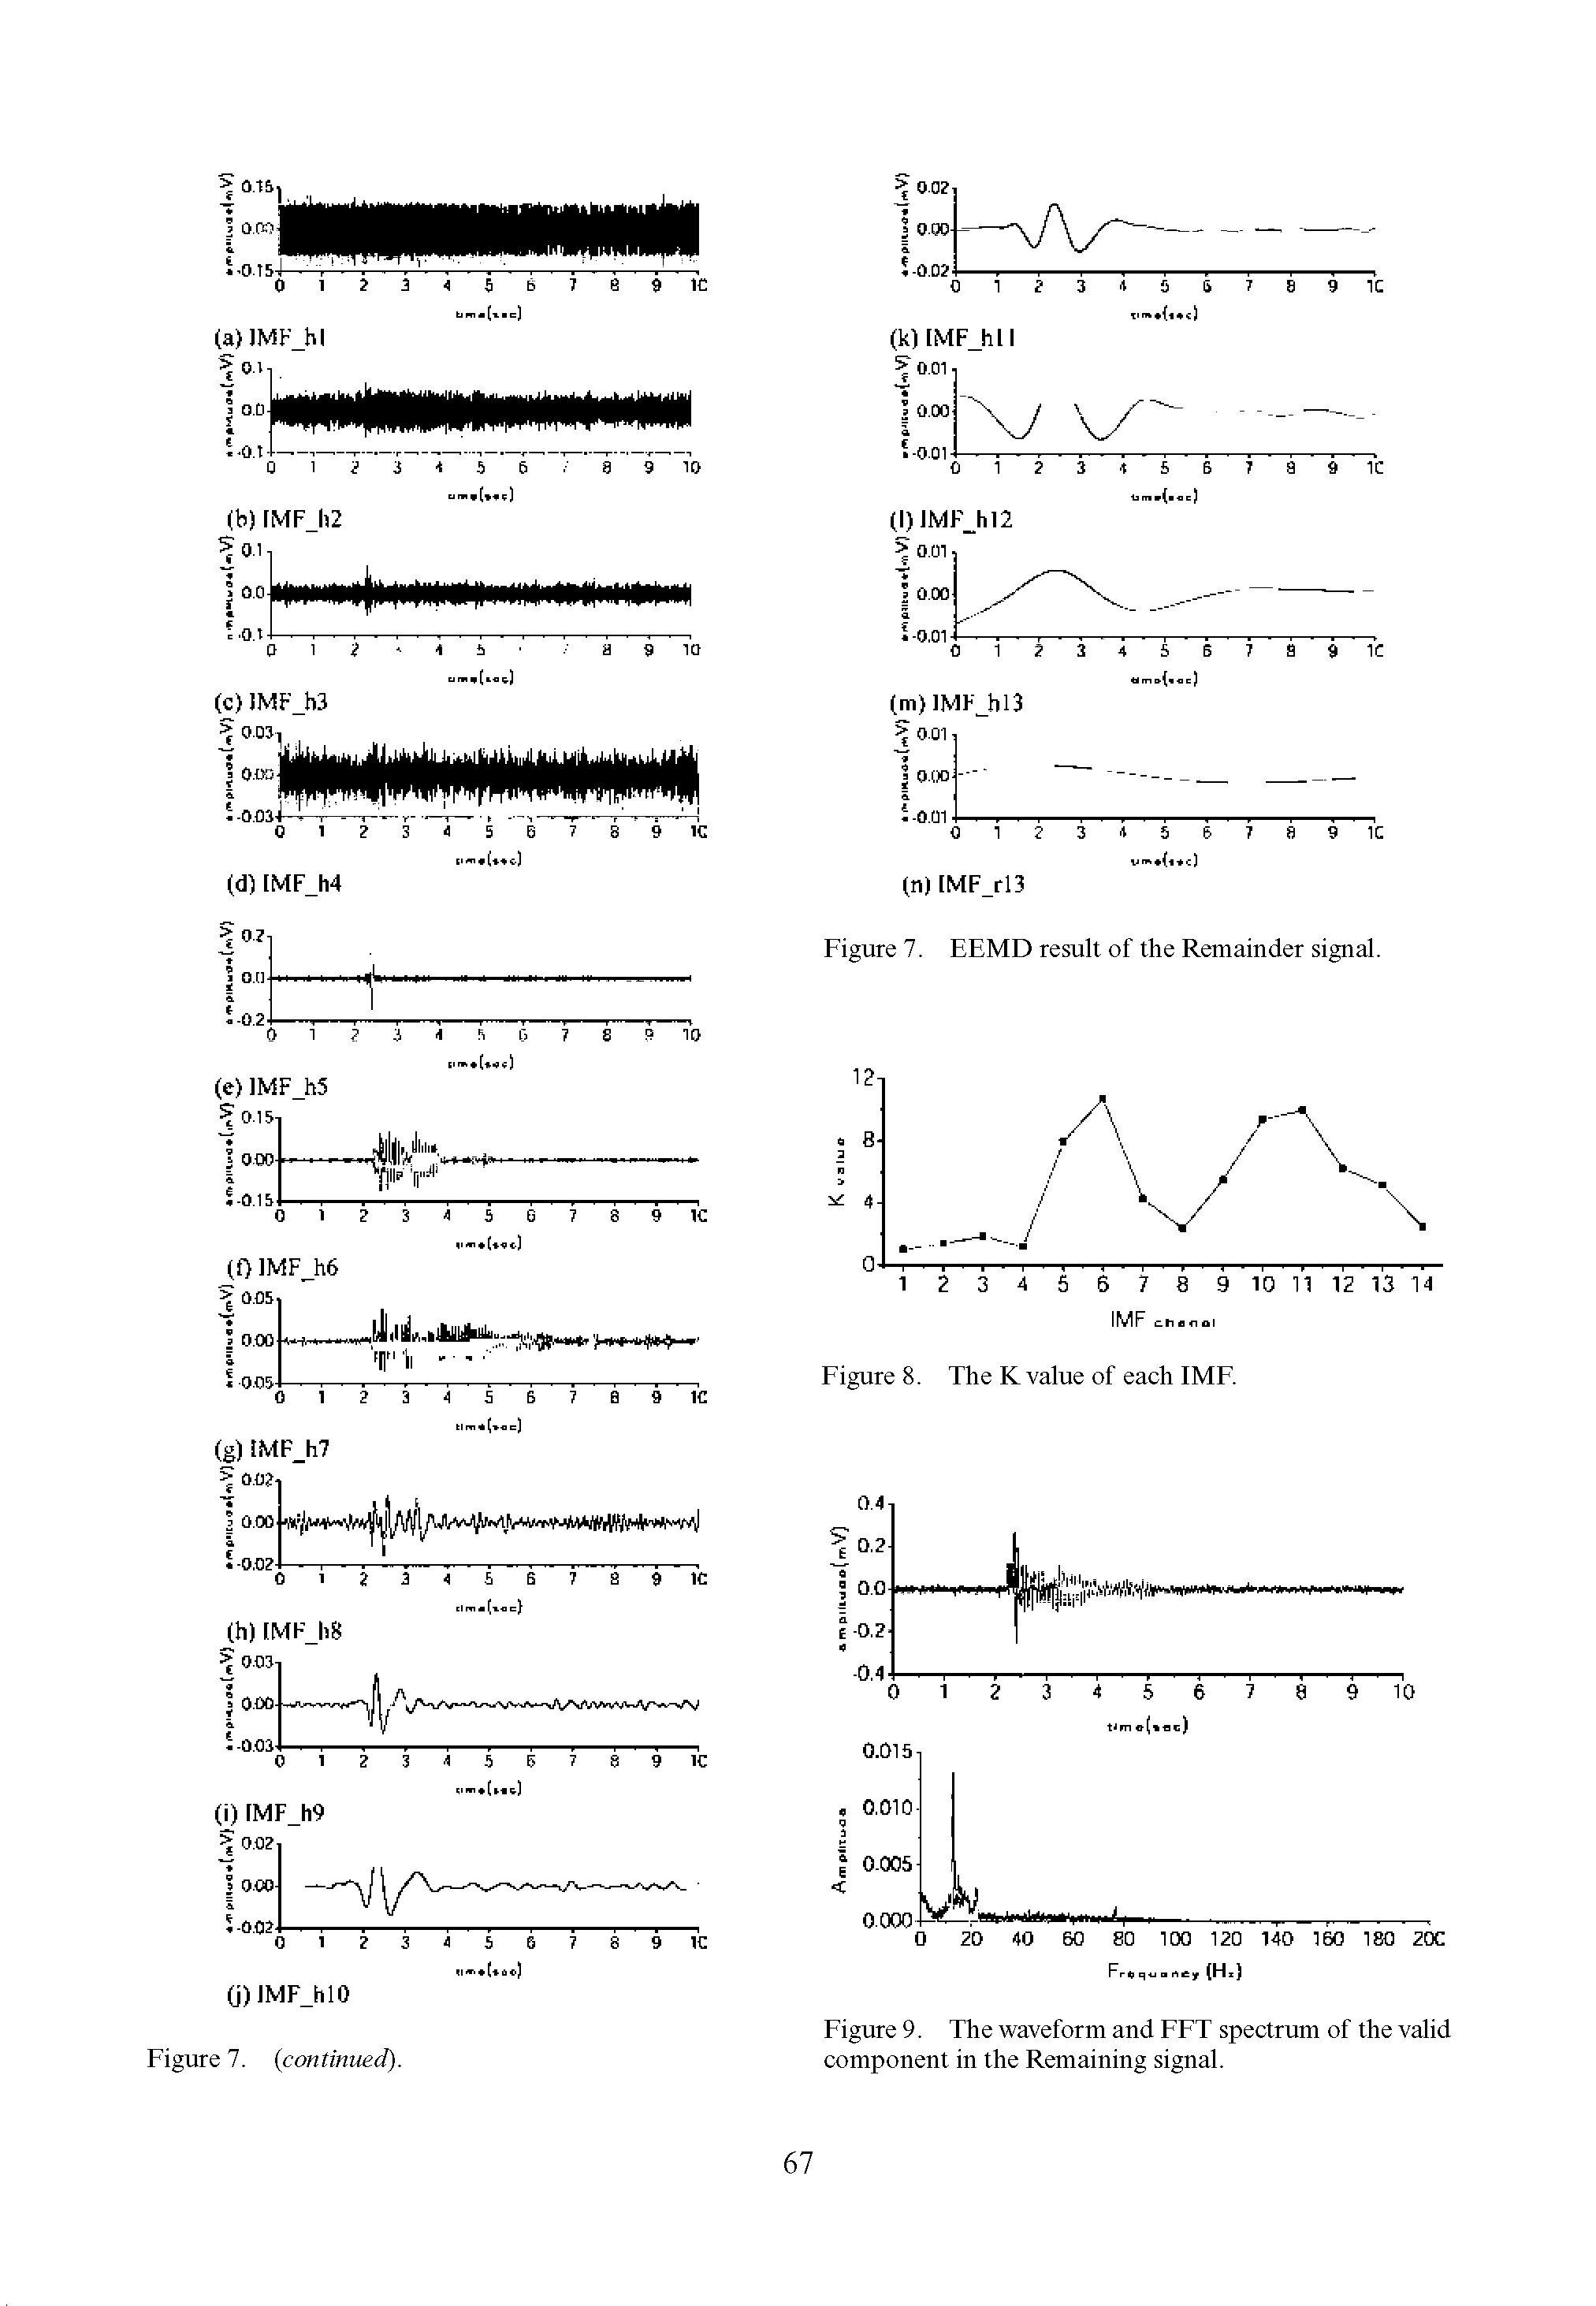 Figure 9. The waveform and FFT spectrum of the valid component in the Remaining signal.